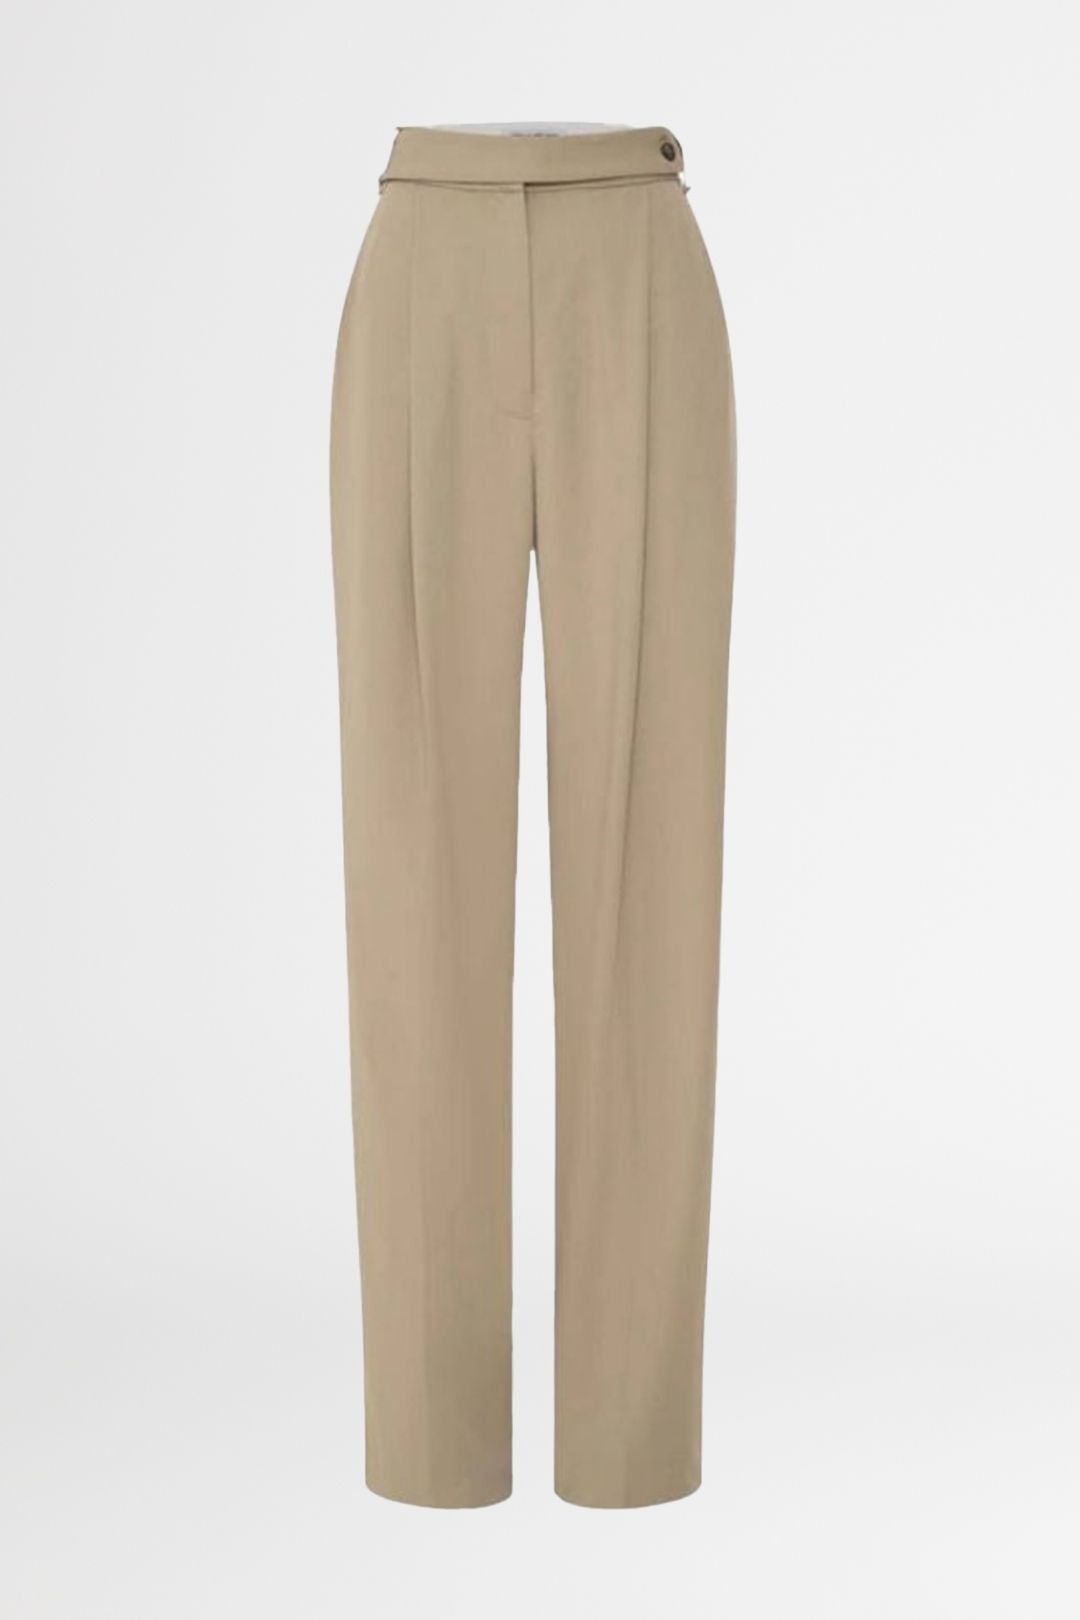 Camilla and Marc Monti Pant Sage